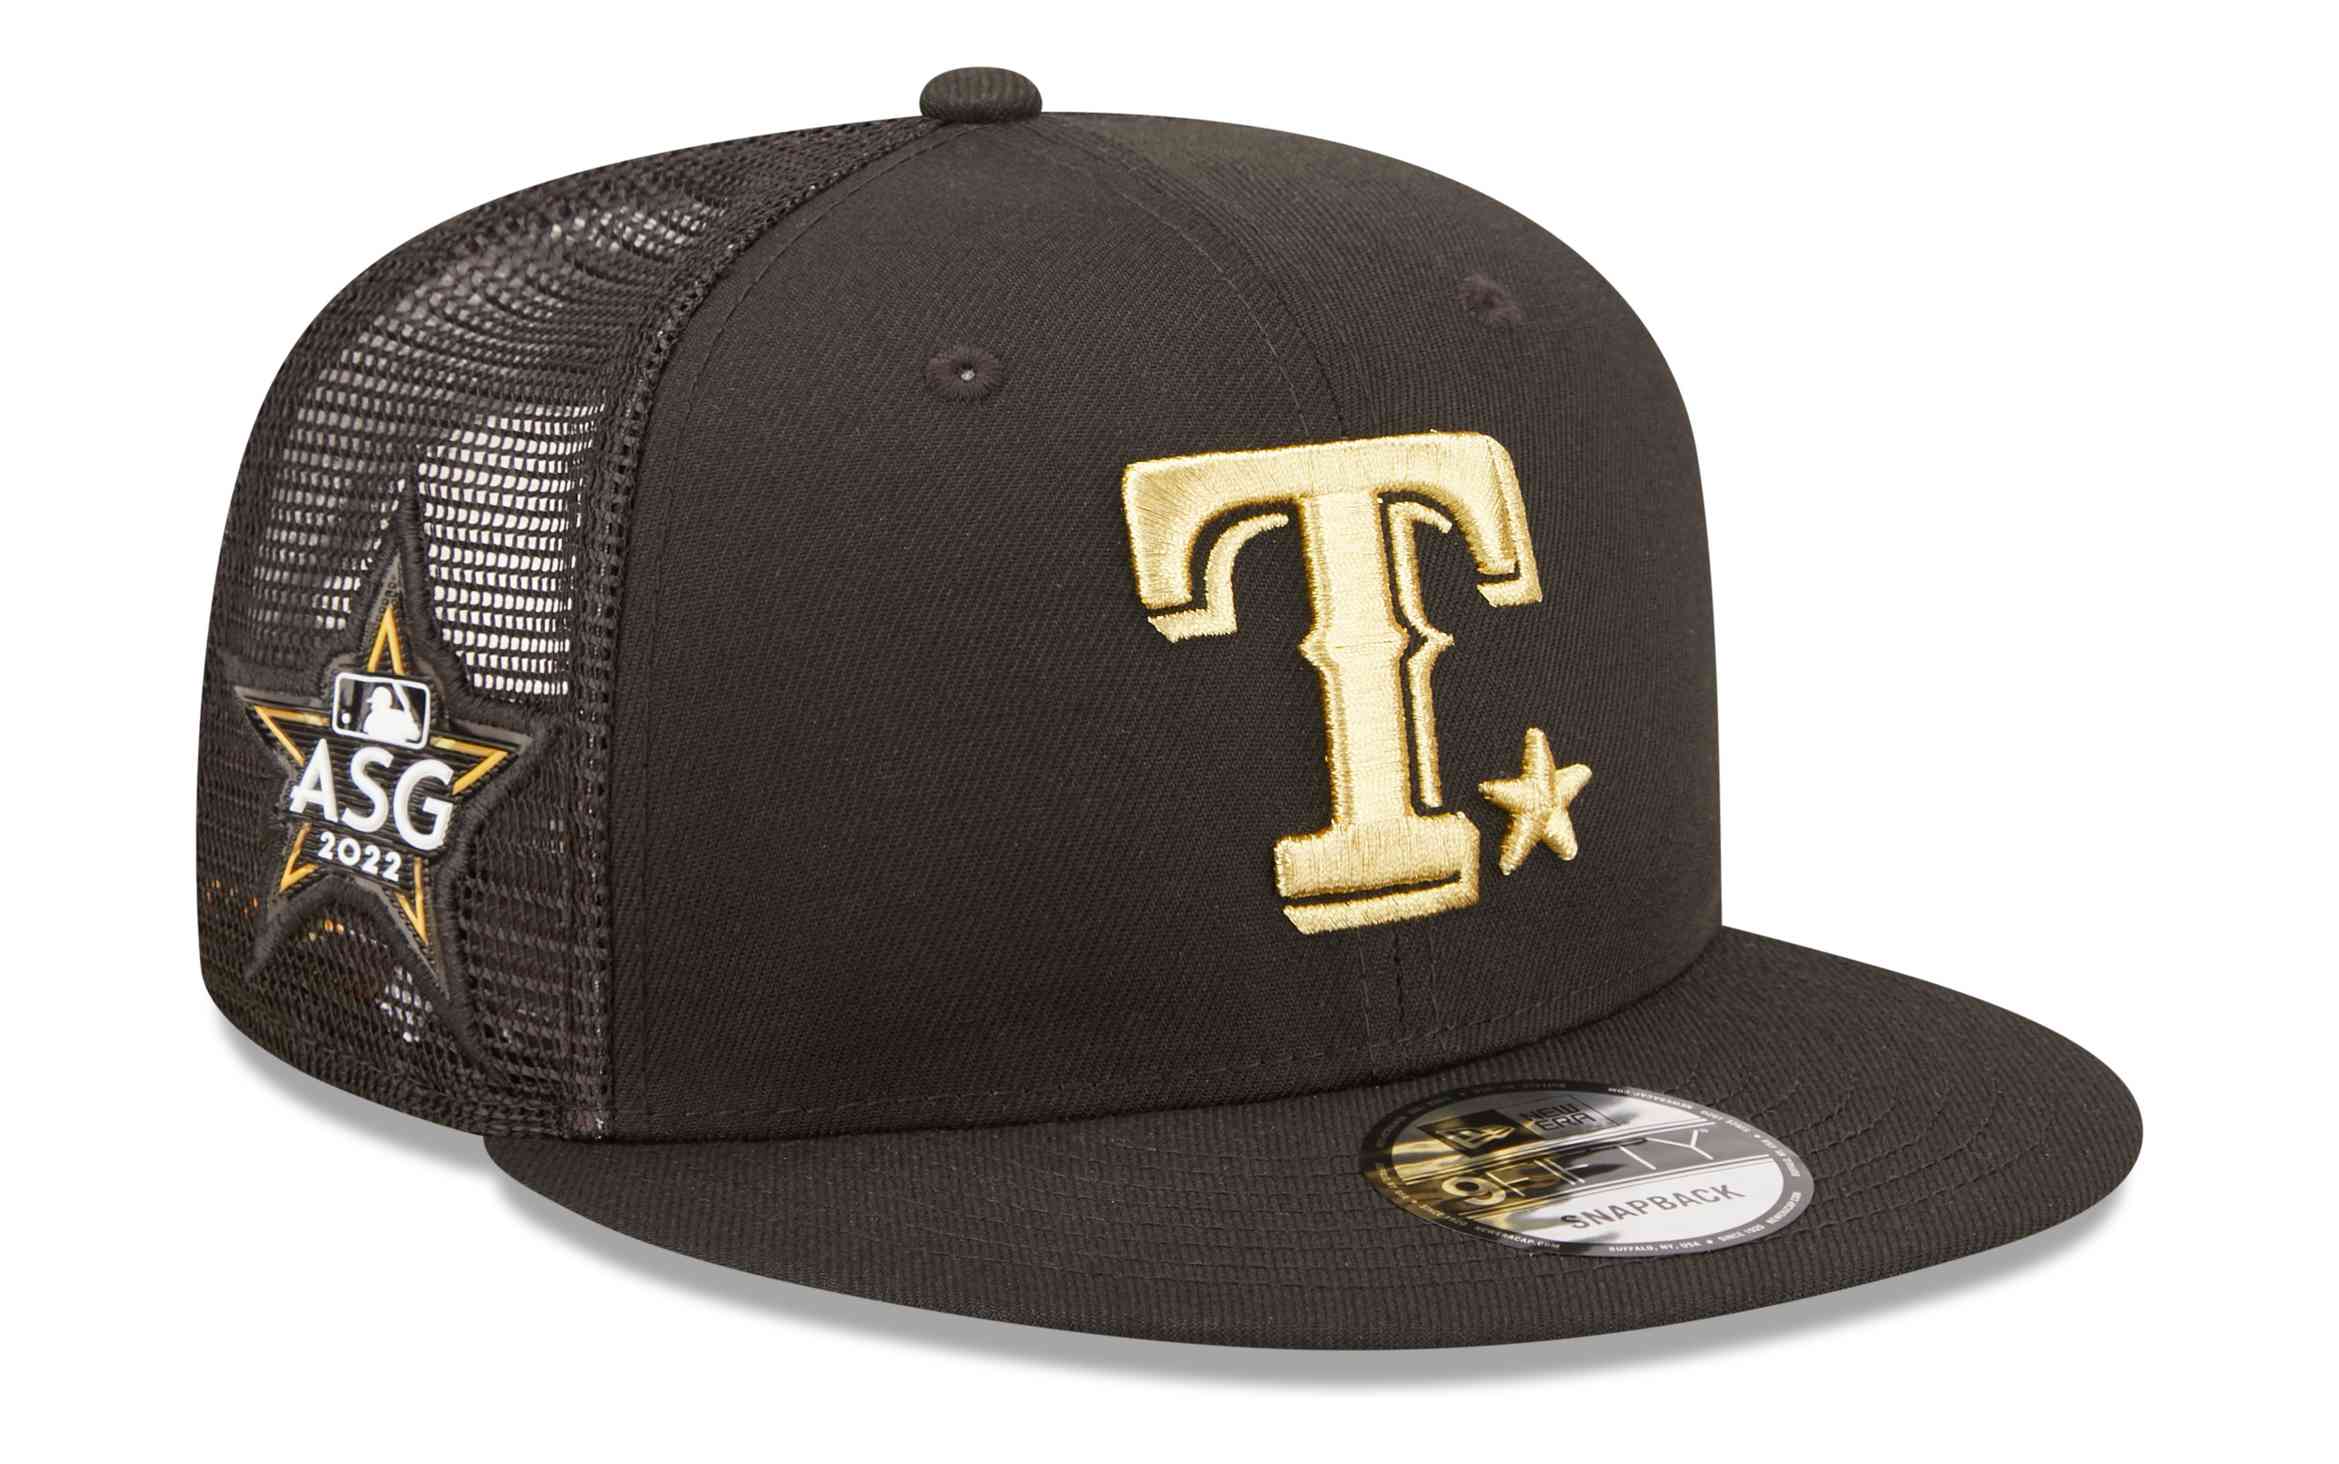 New Era - MLB Texas Rangers All Star Game Patch 9Fifty